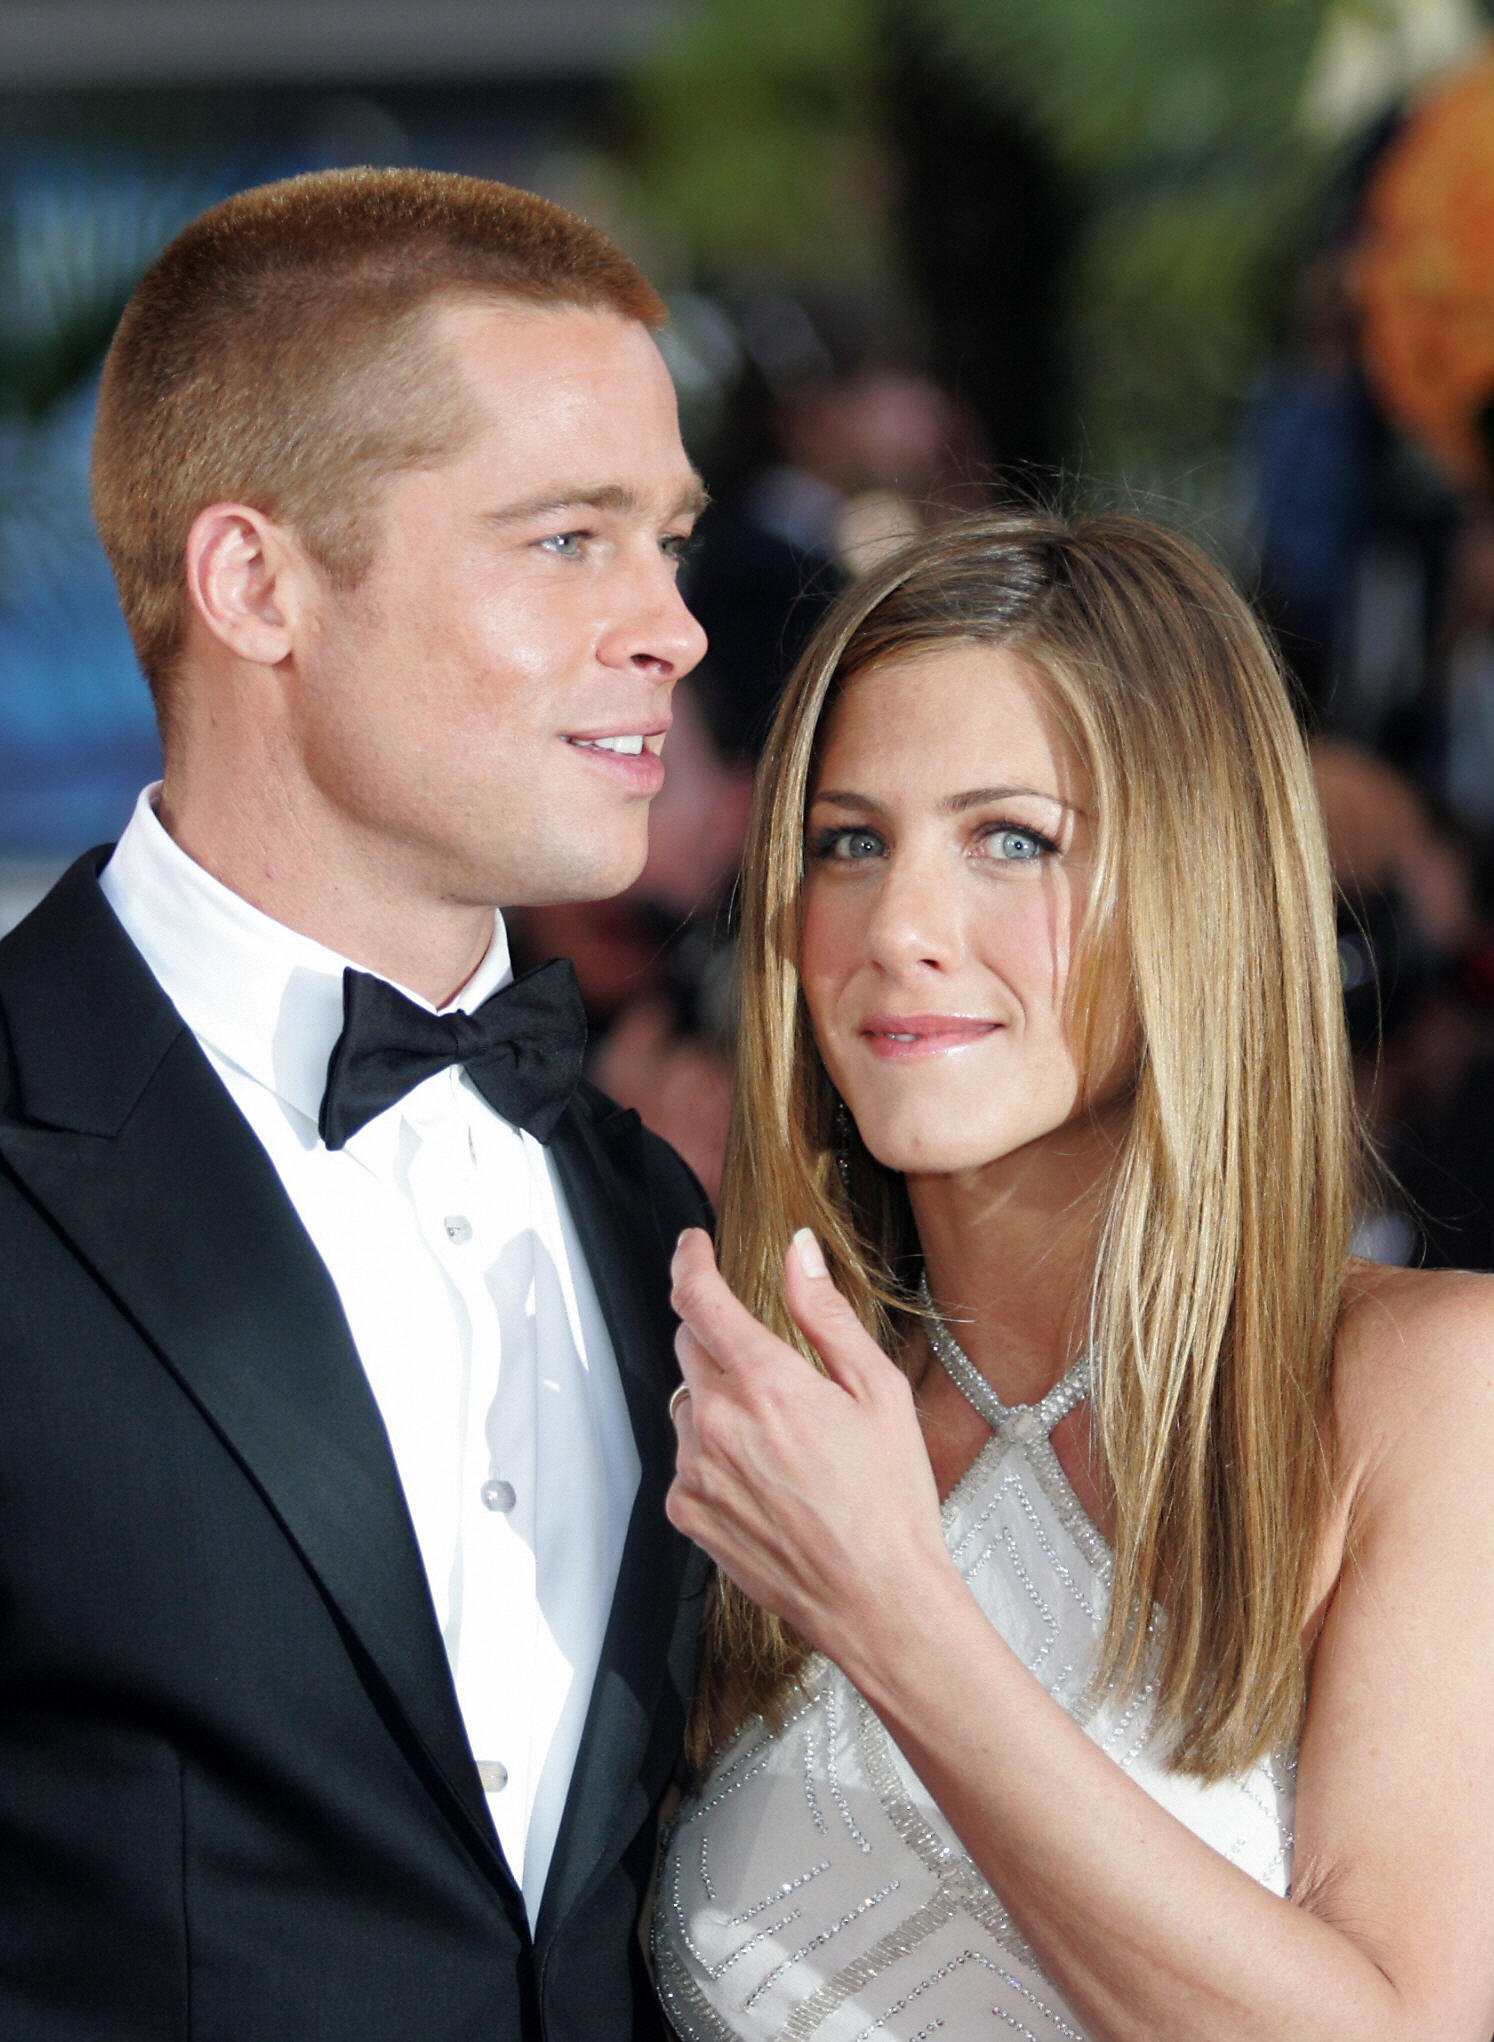 Brad Pitt and his wife Jennifer Aniston arrive to attend the official projection of US director Wolfgang Petersen's film 